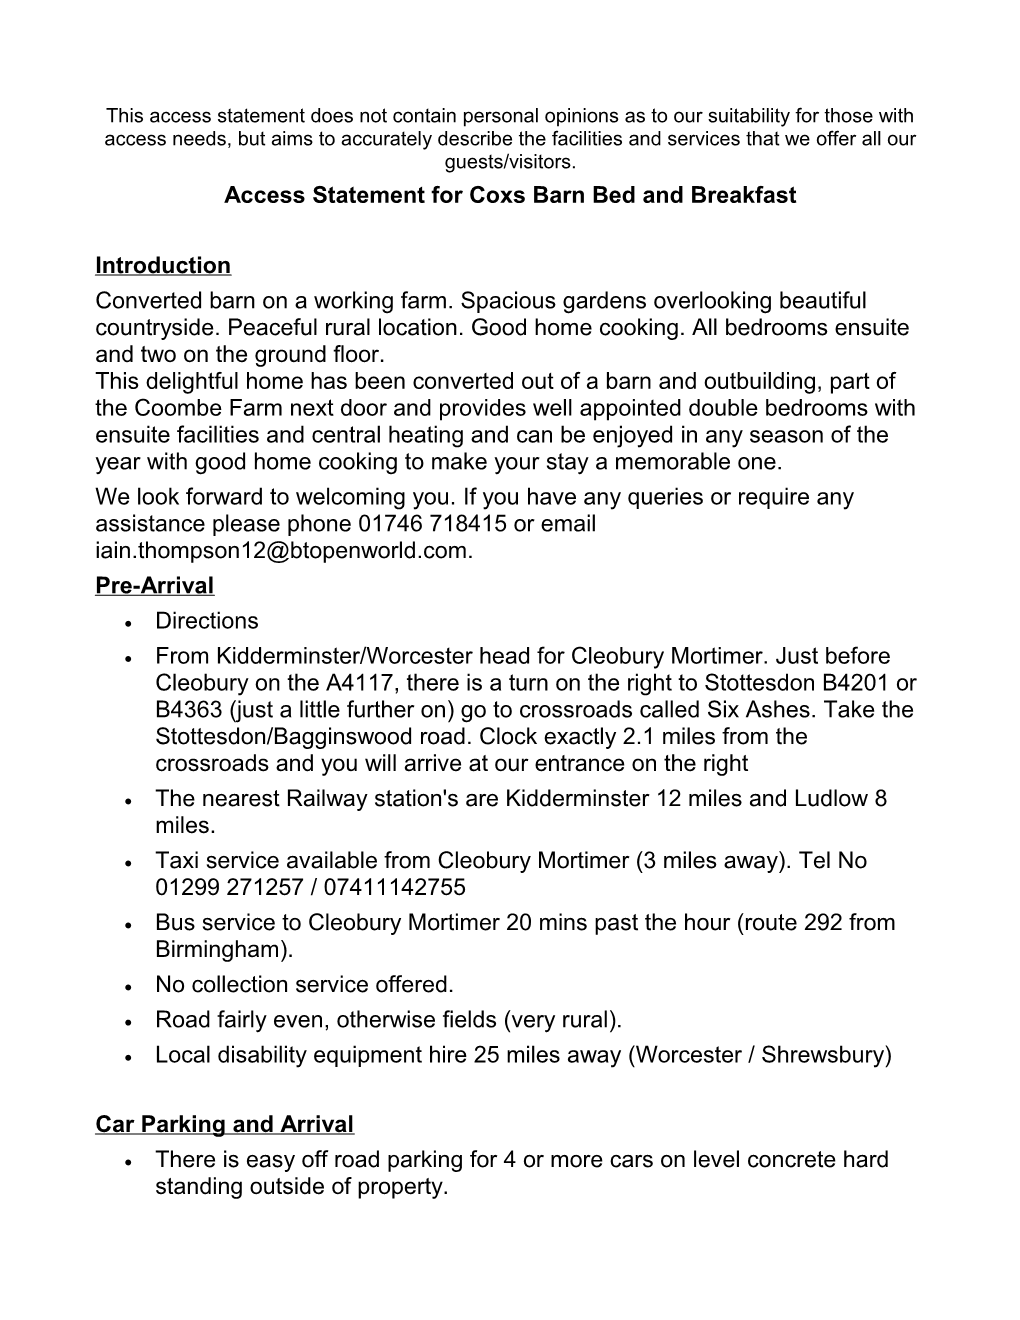 Access Statement for Coxs Barn Bed and Breakfast